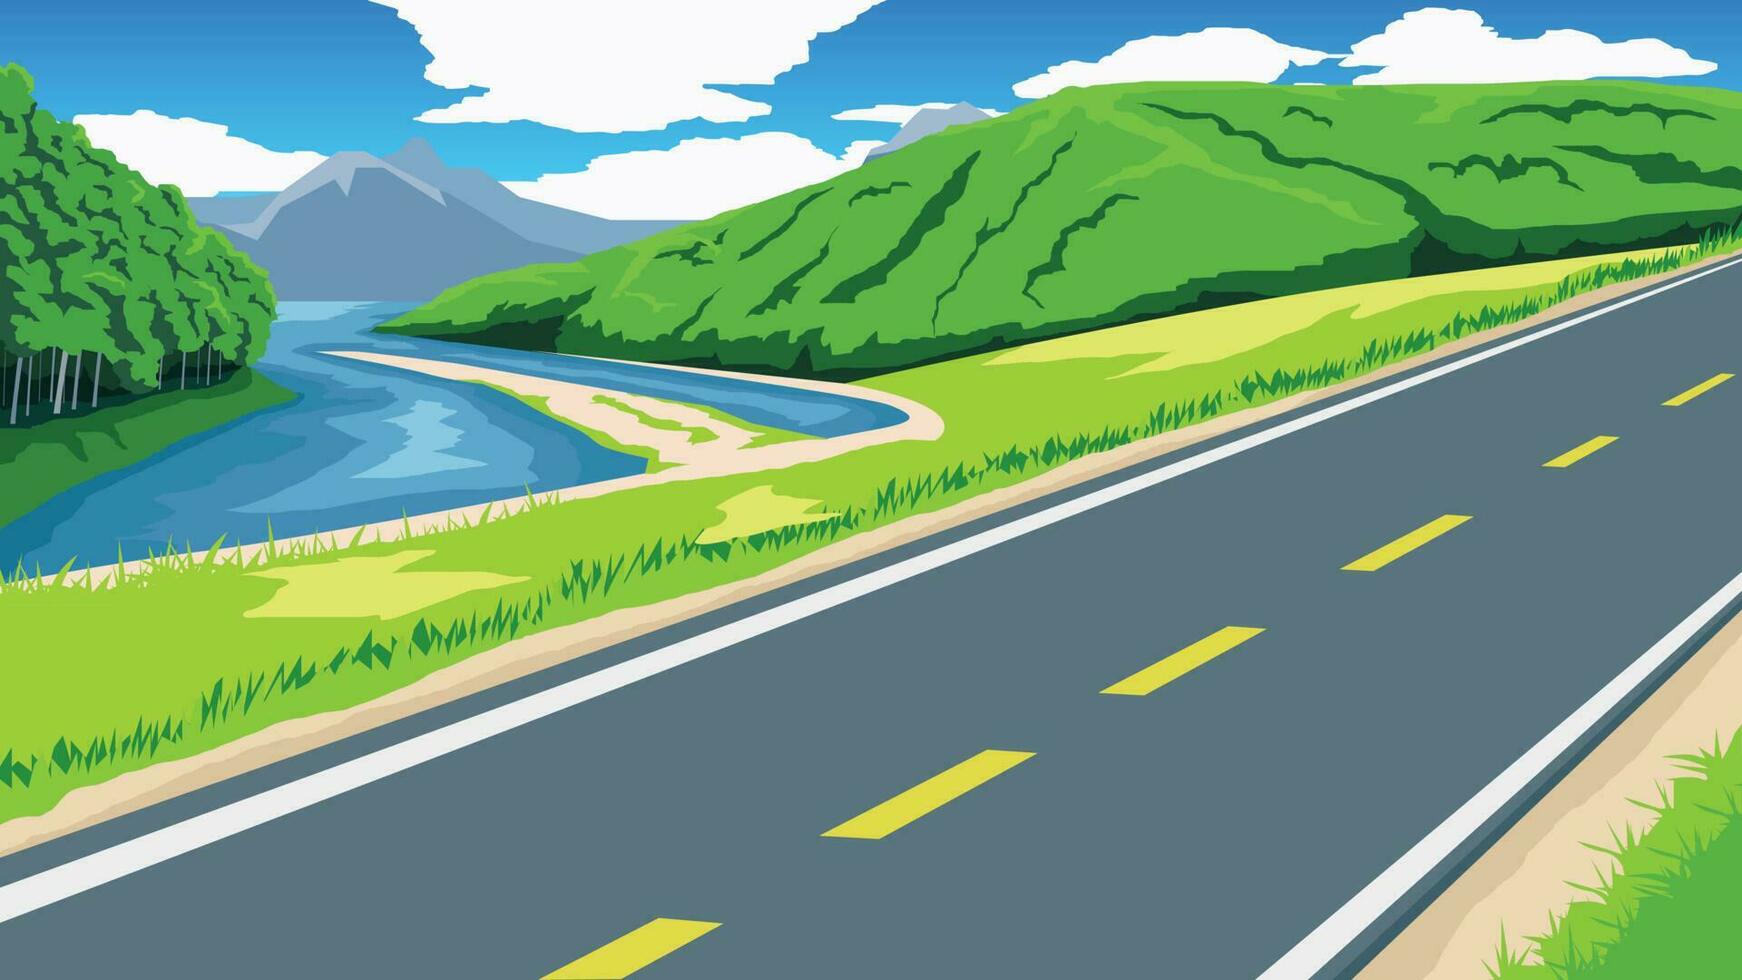 Copy Space Flat Vector Illustration. of Asphalt road passing through the river and environment of wide open fields of green grass. Green plains and low mountains.  Under blue sky and white clouds.